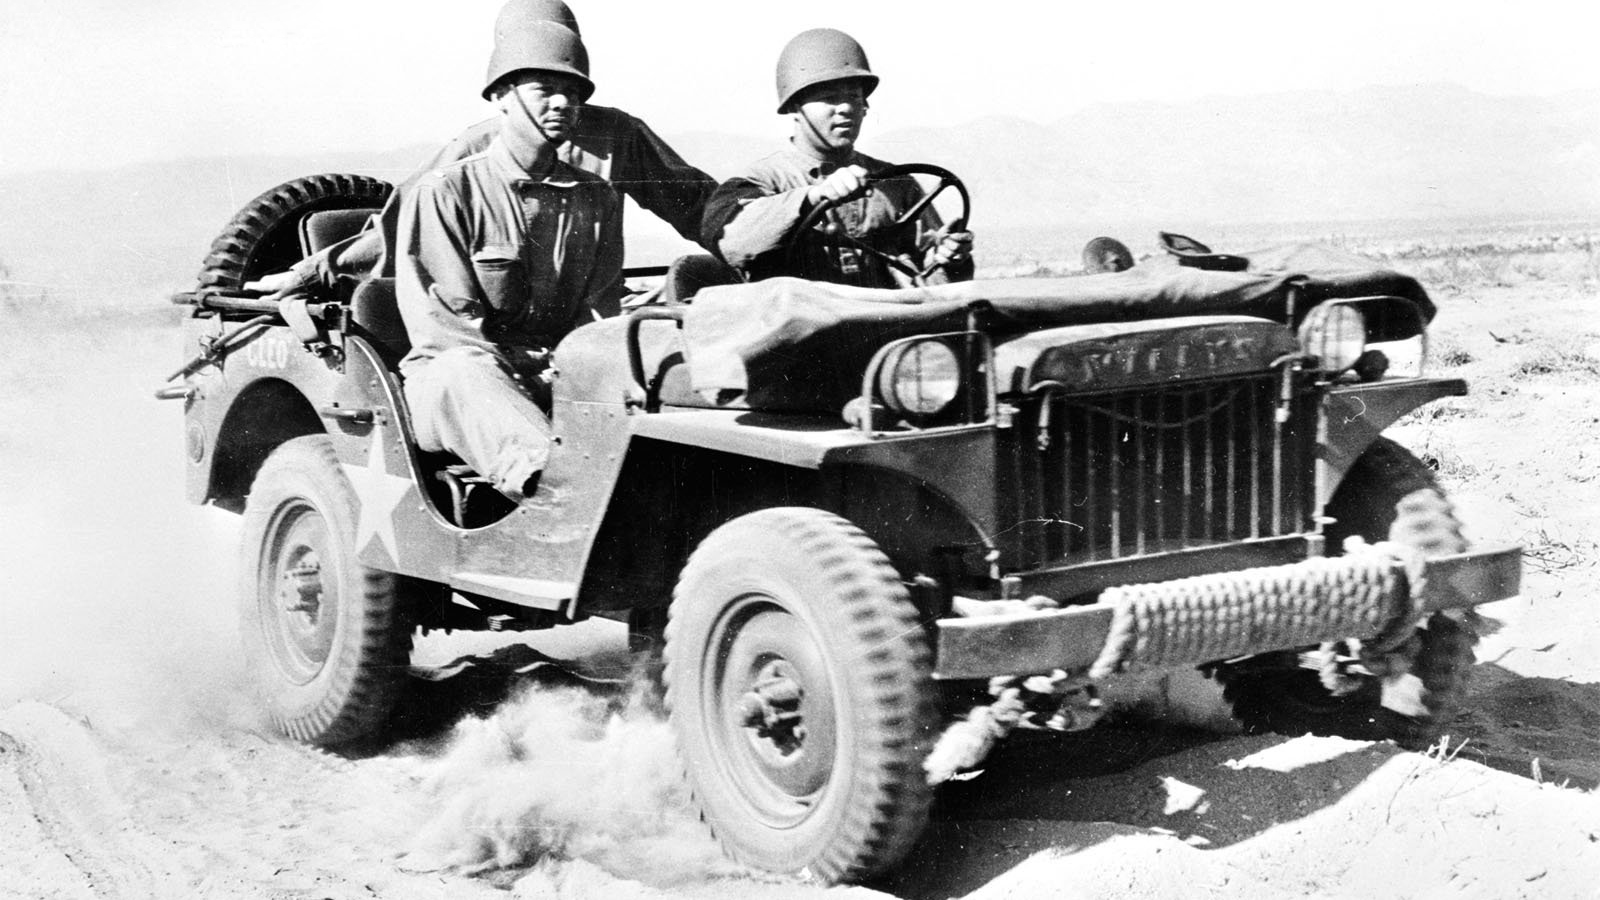 1940s Military Jeep in battle